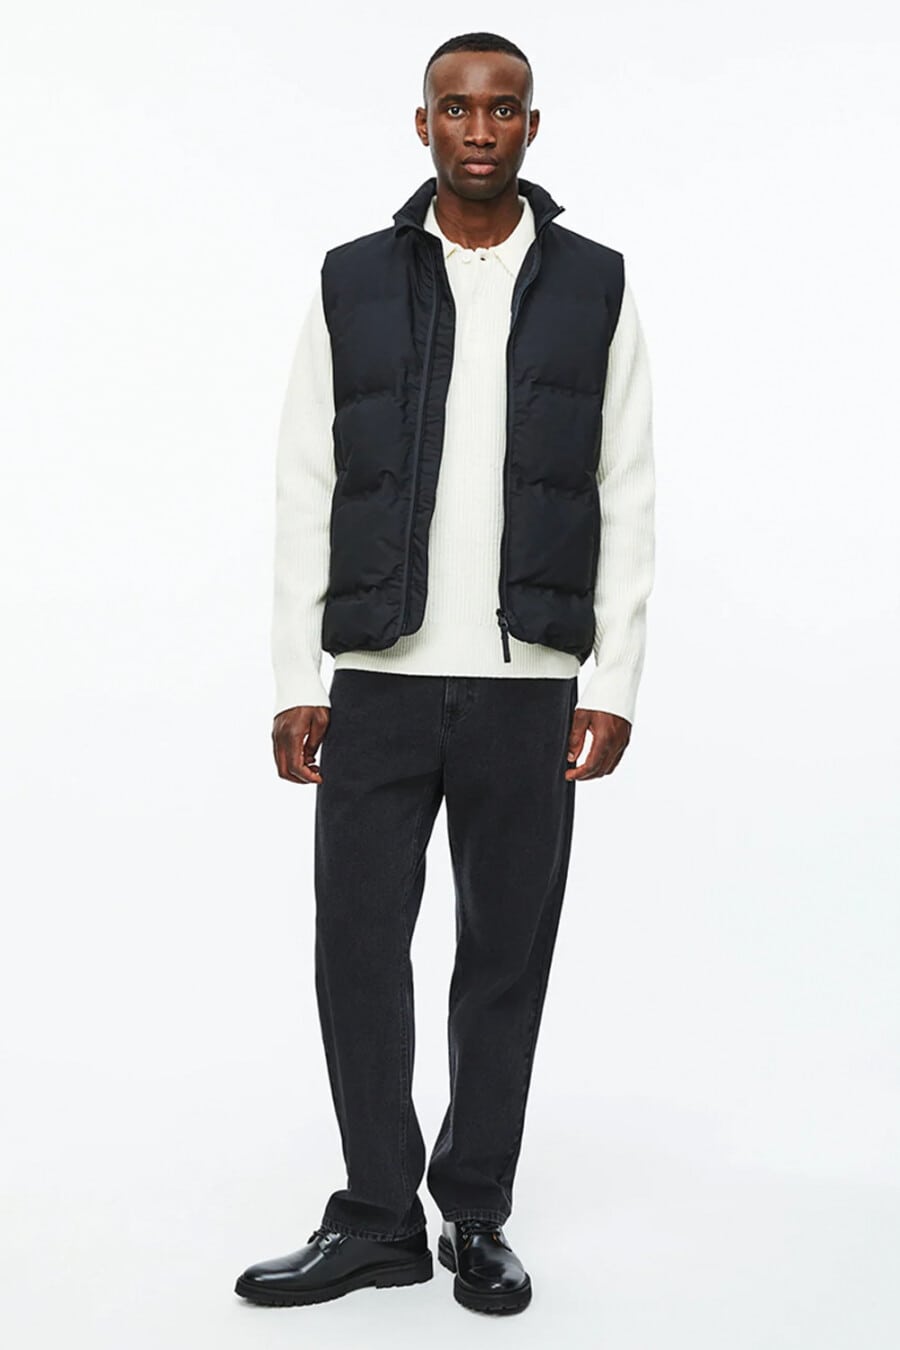 Men's black pants, white long sleeve polo shirt, black puffer jacket and black leather shoes outfit